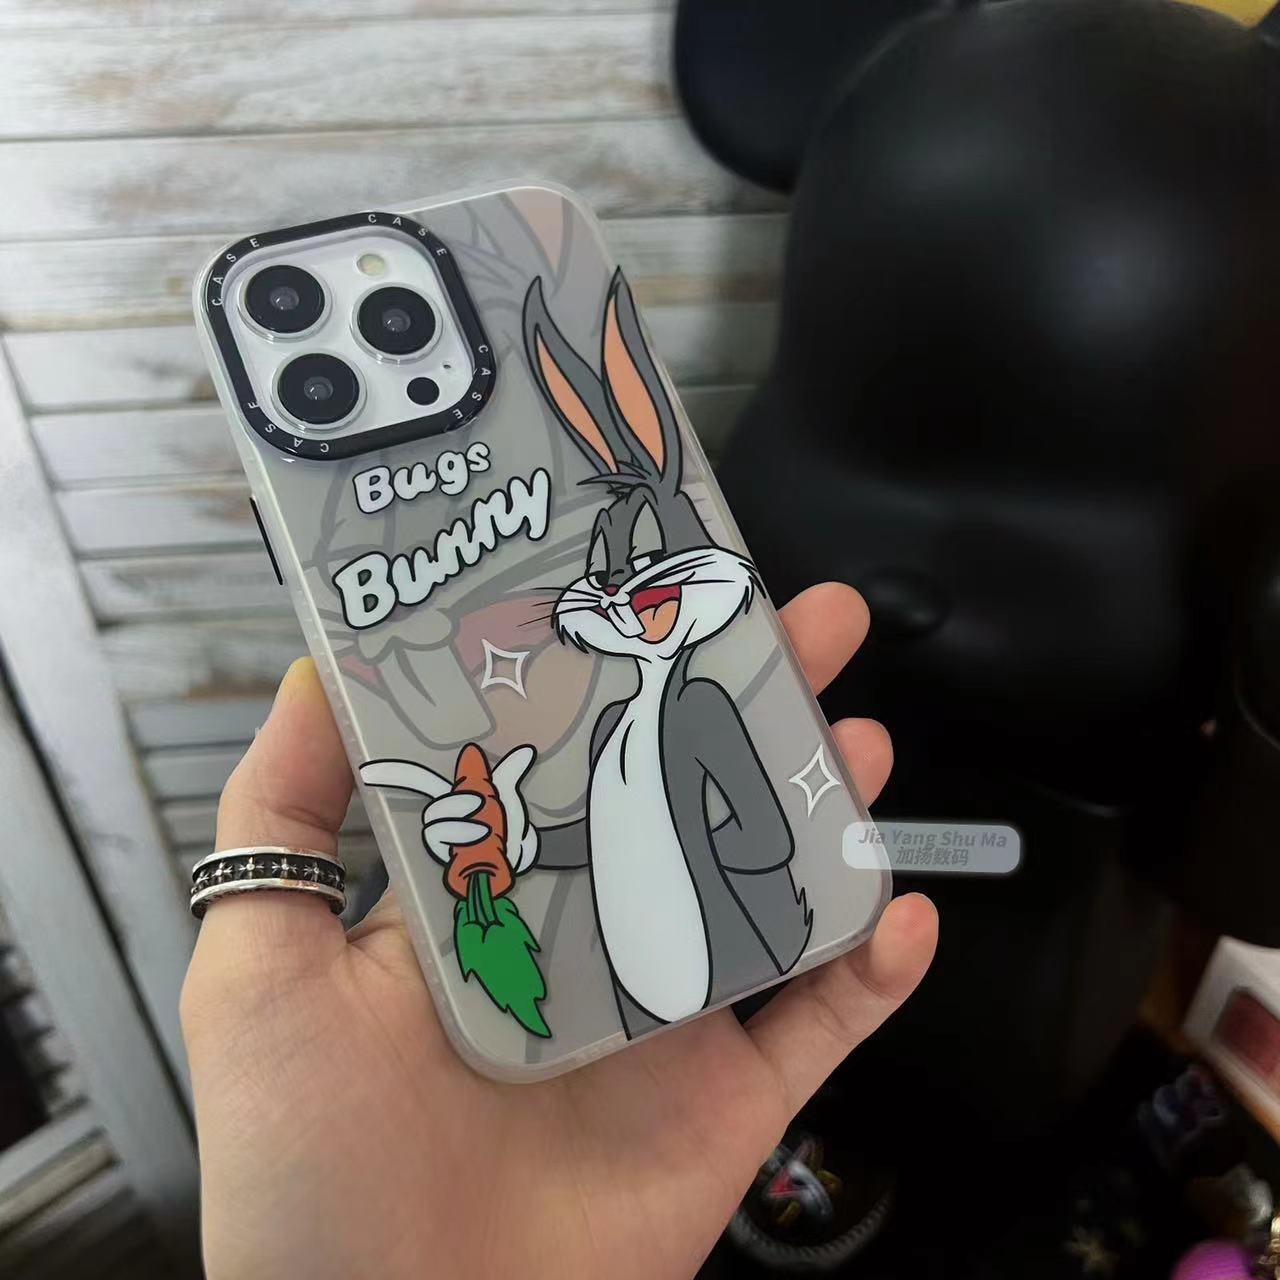 Bugs Bunny beautiful design Case For iPhone with samsung